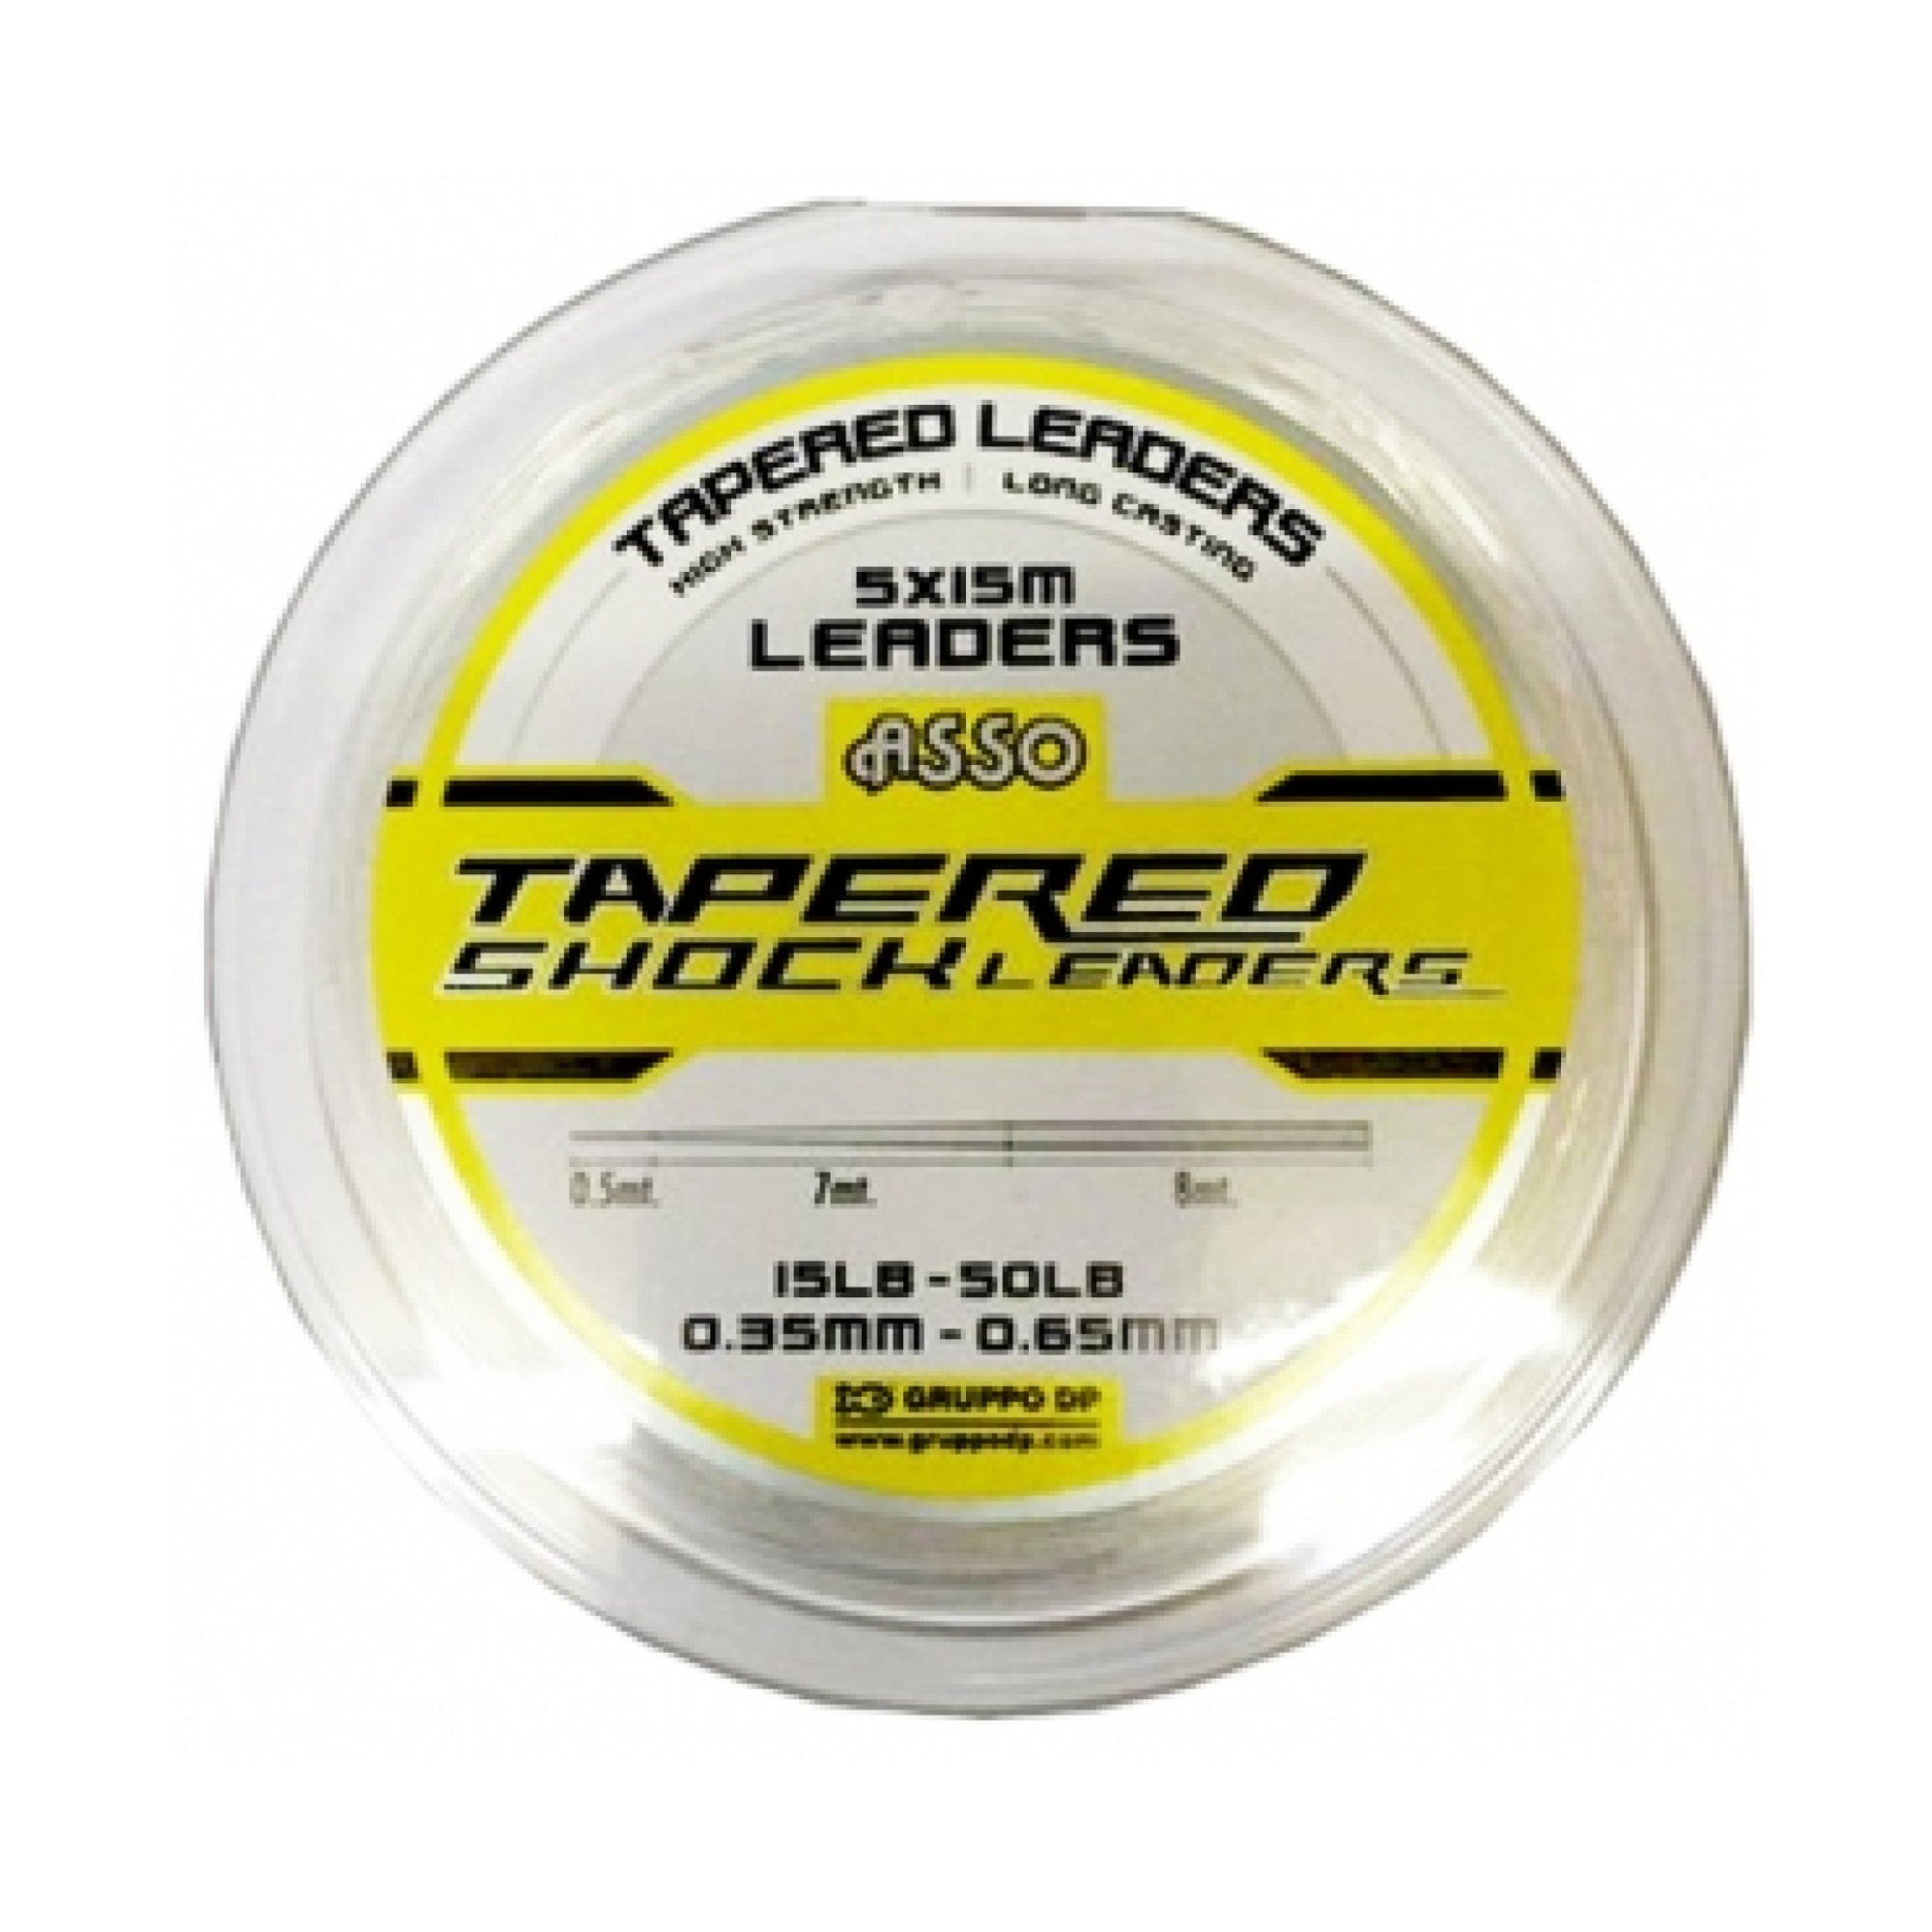 YELLOW / RED Asso Tapered Shock Leaders 